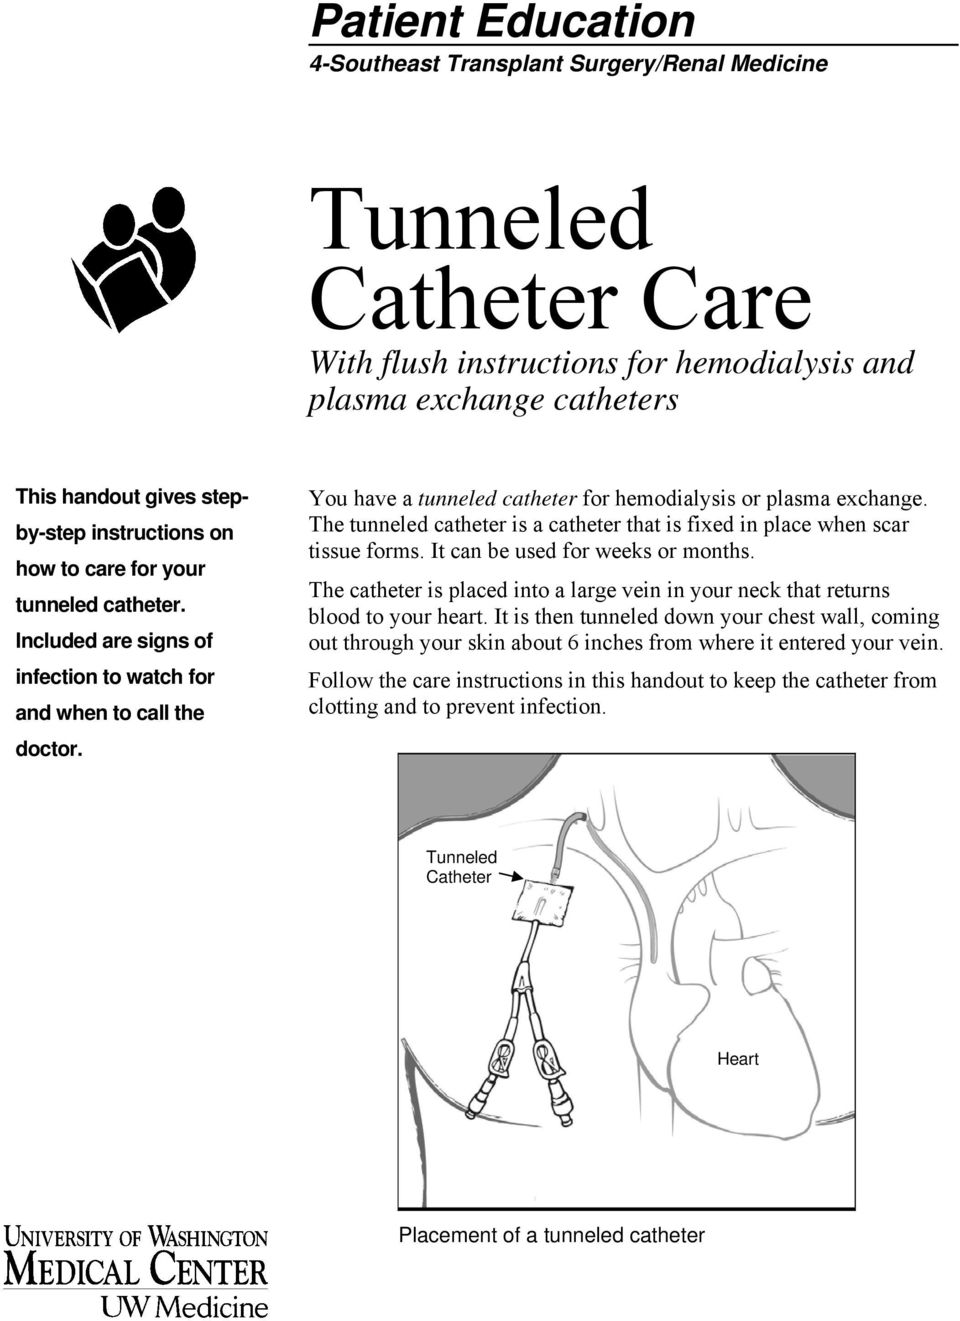 The tunneled catheter is a catheter that is fixed in place when scar tissue forms. It can be used for weeks or months.